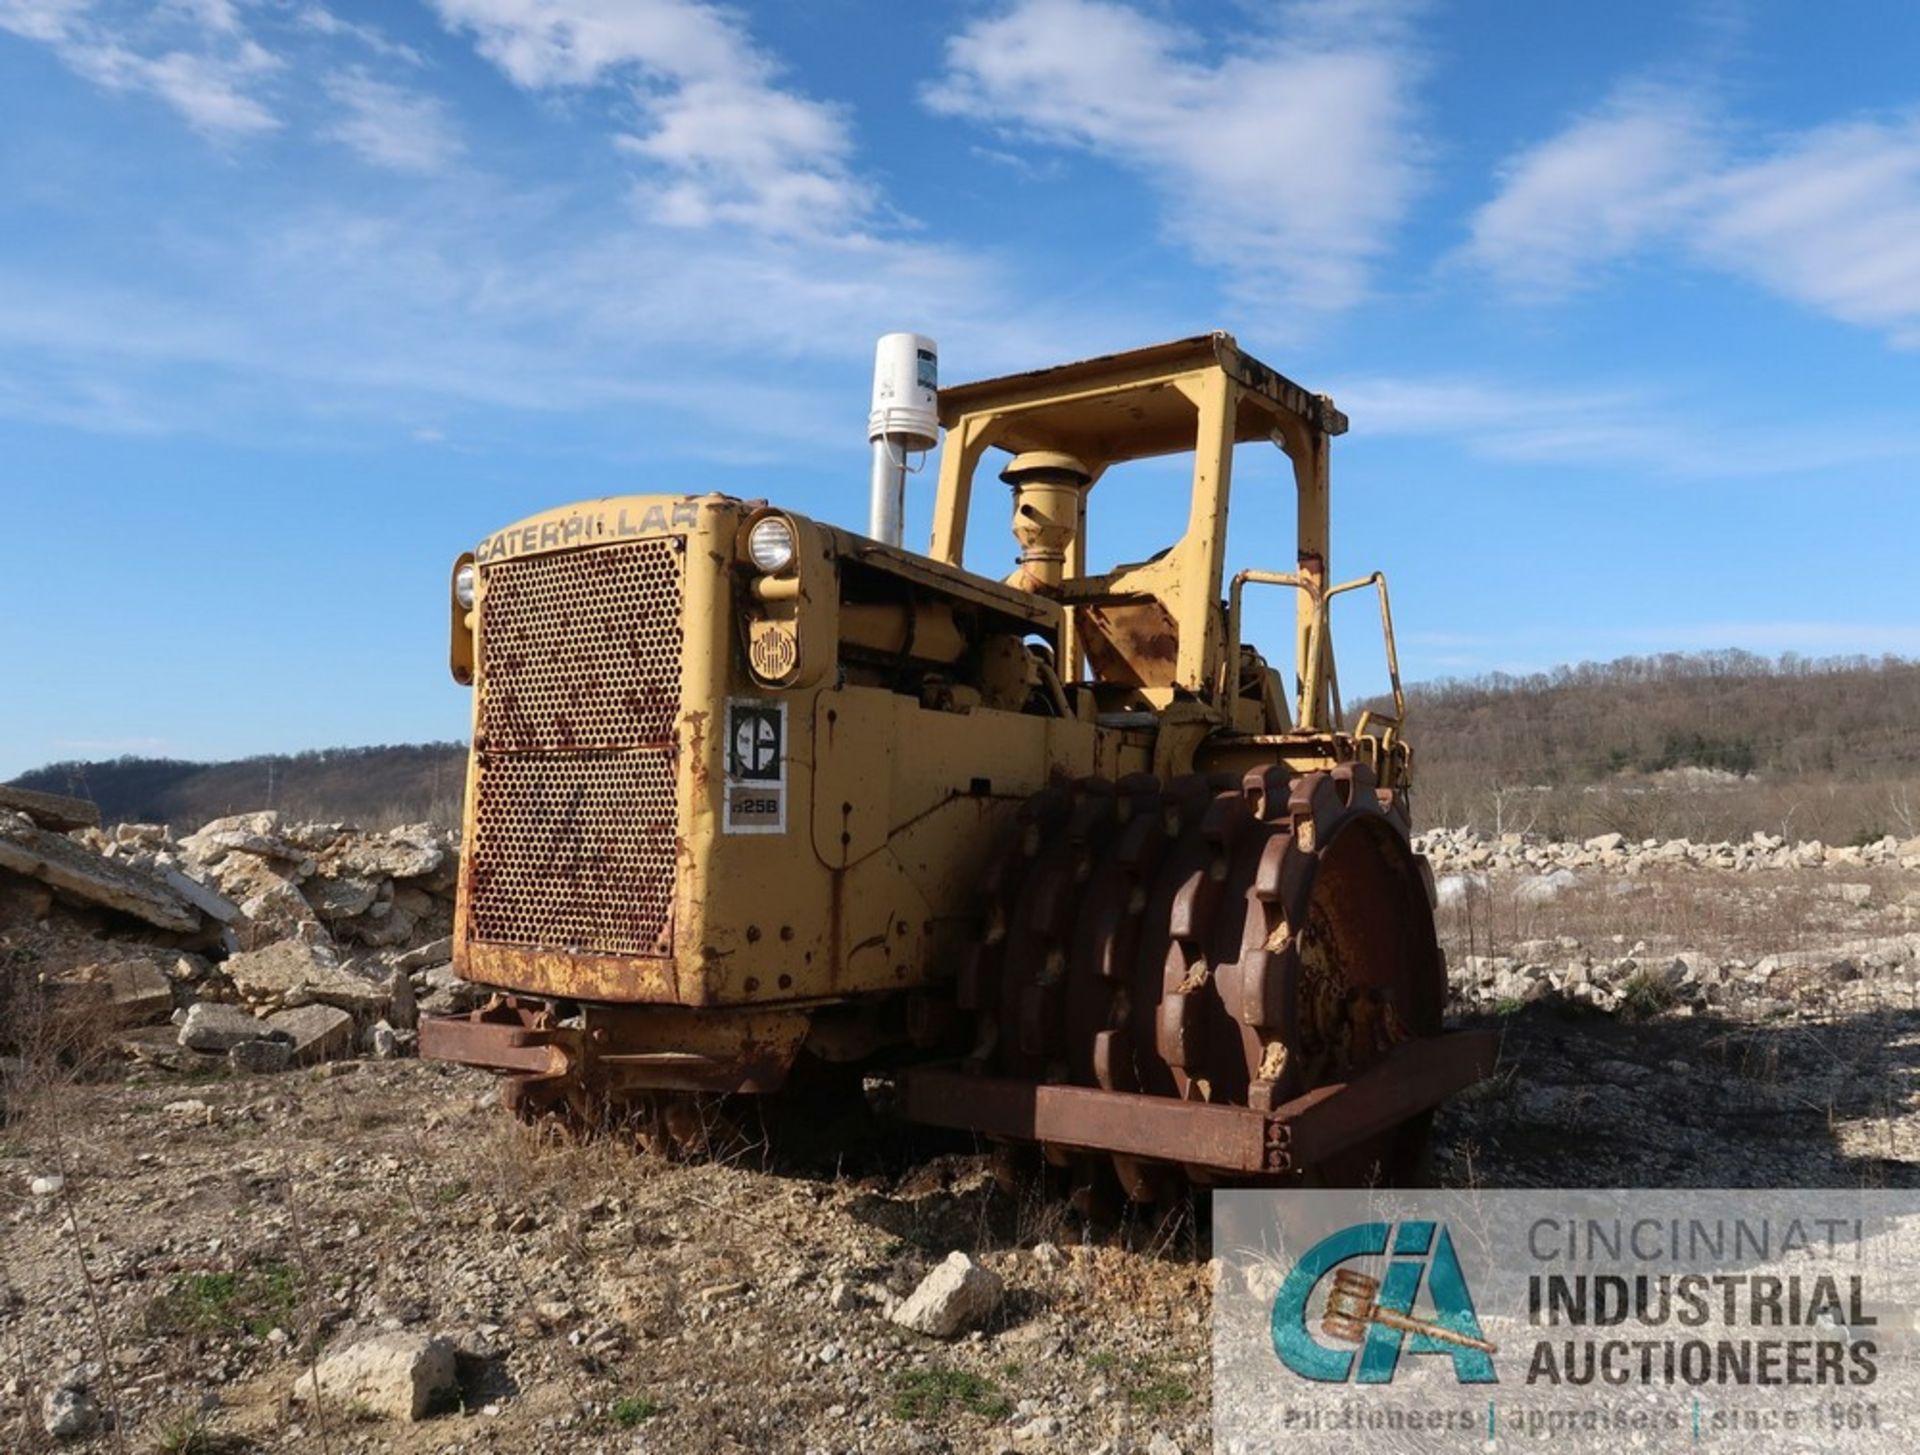 CATERPILLAR MODEL 825B SHEEPS FOOT COMPACTOR; S/N N/A (NEW 1973), 168" STRAIGHT BLADE, 46" WIDE - Image 2 of 16